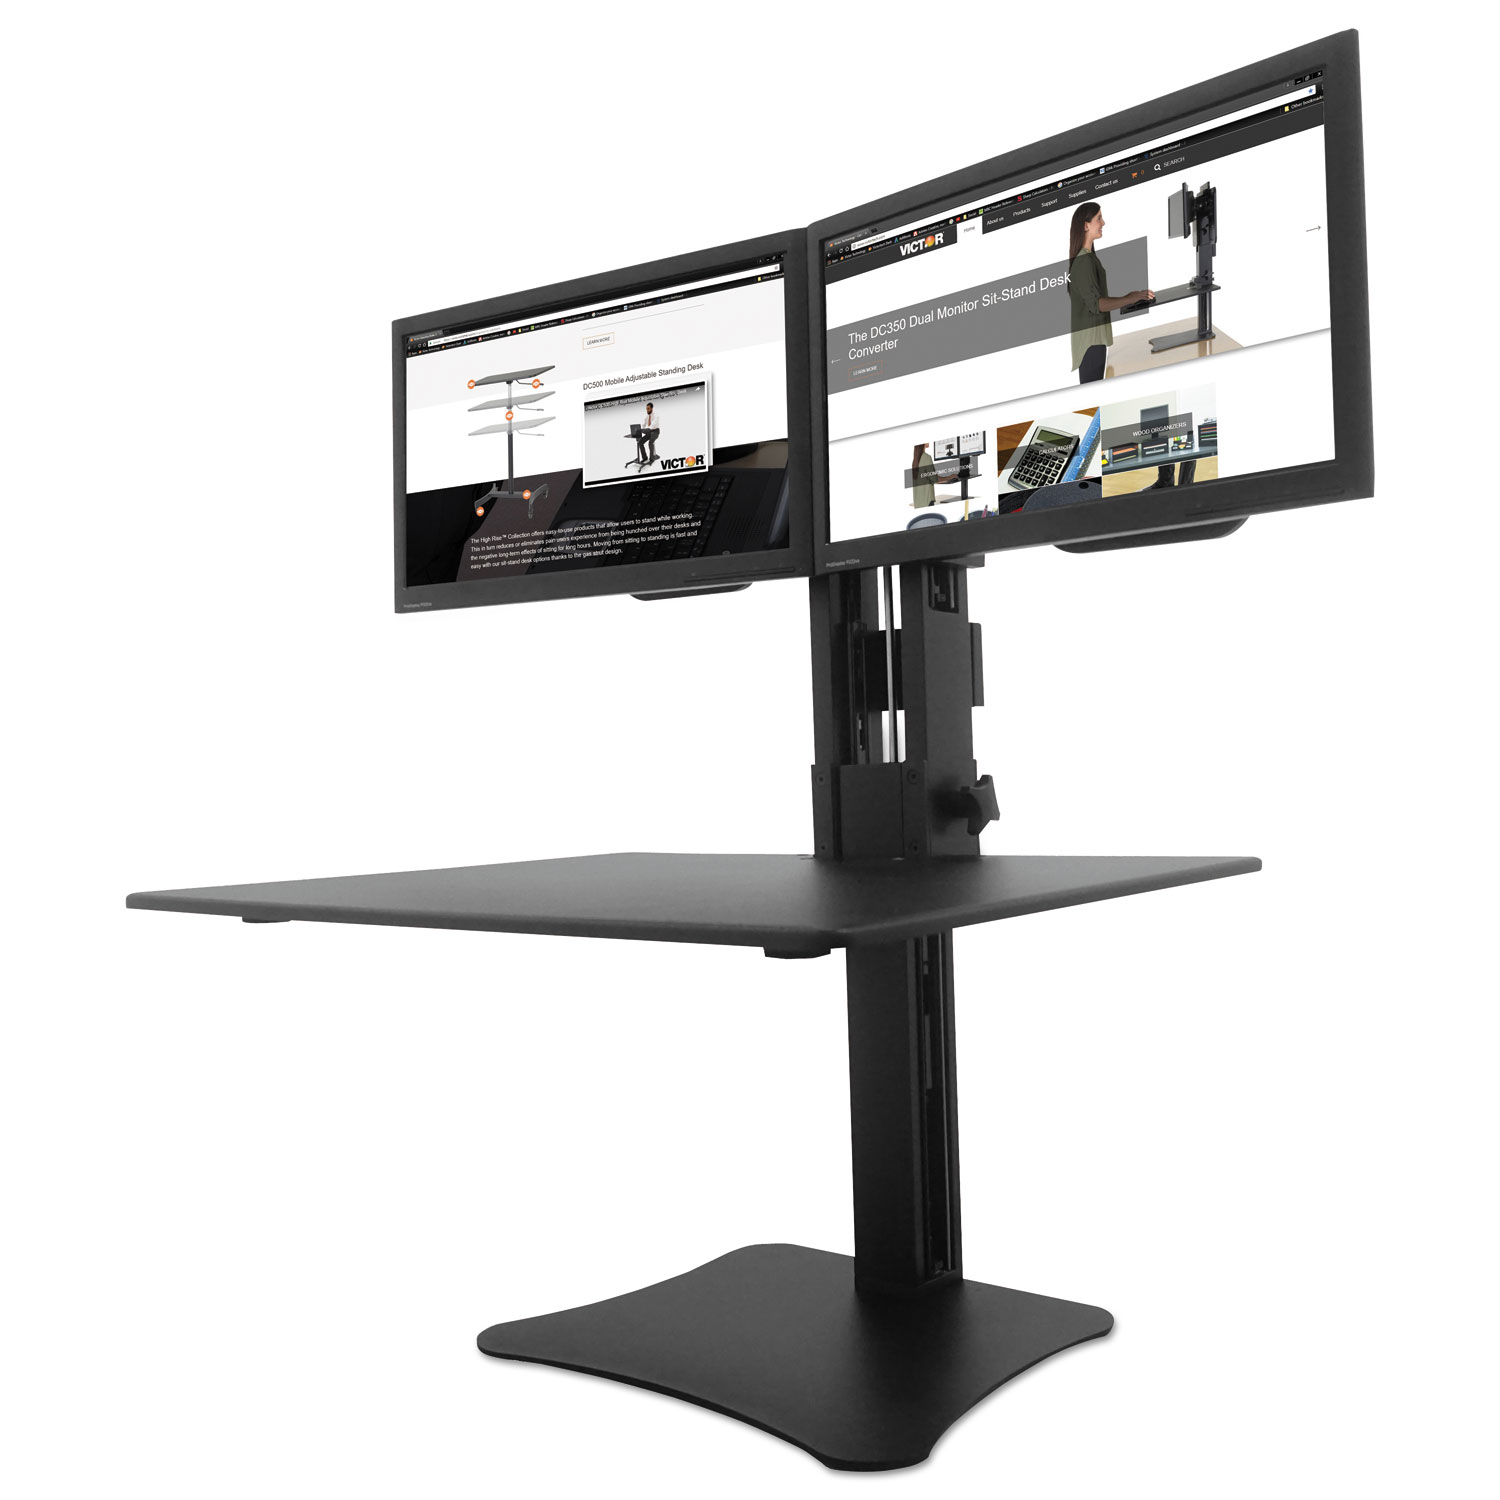  Victor DC350 High Rise Dual Monitor Standing Desk Workstation, 28w x 23d x 15.5h, Black (VCTDC350) 